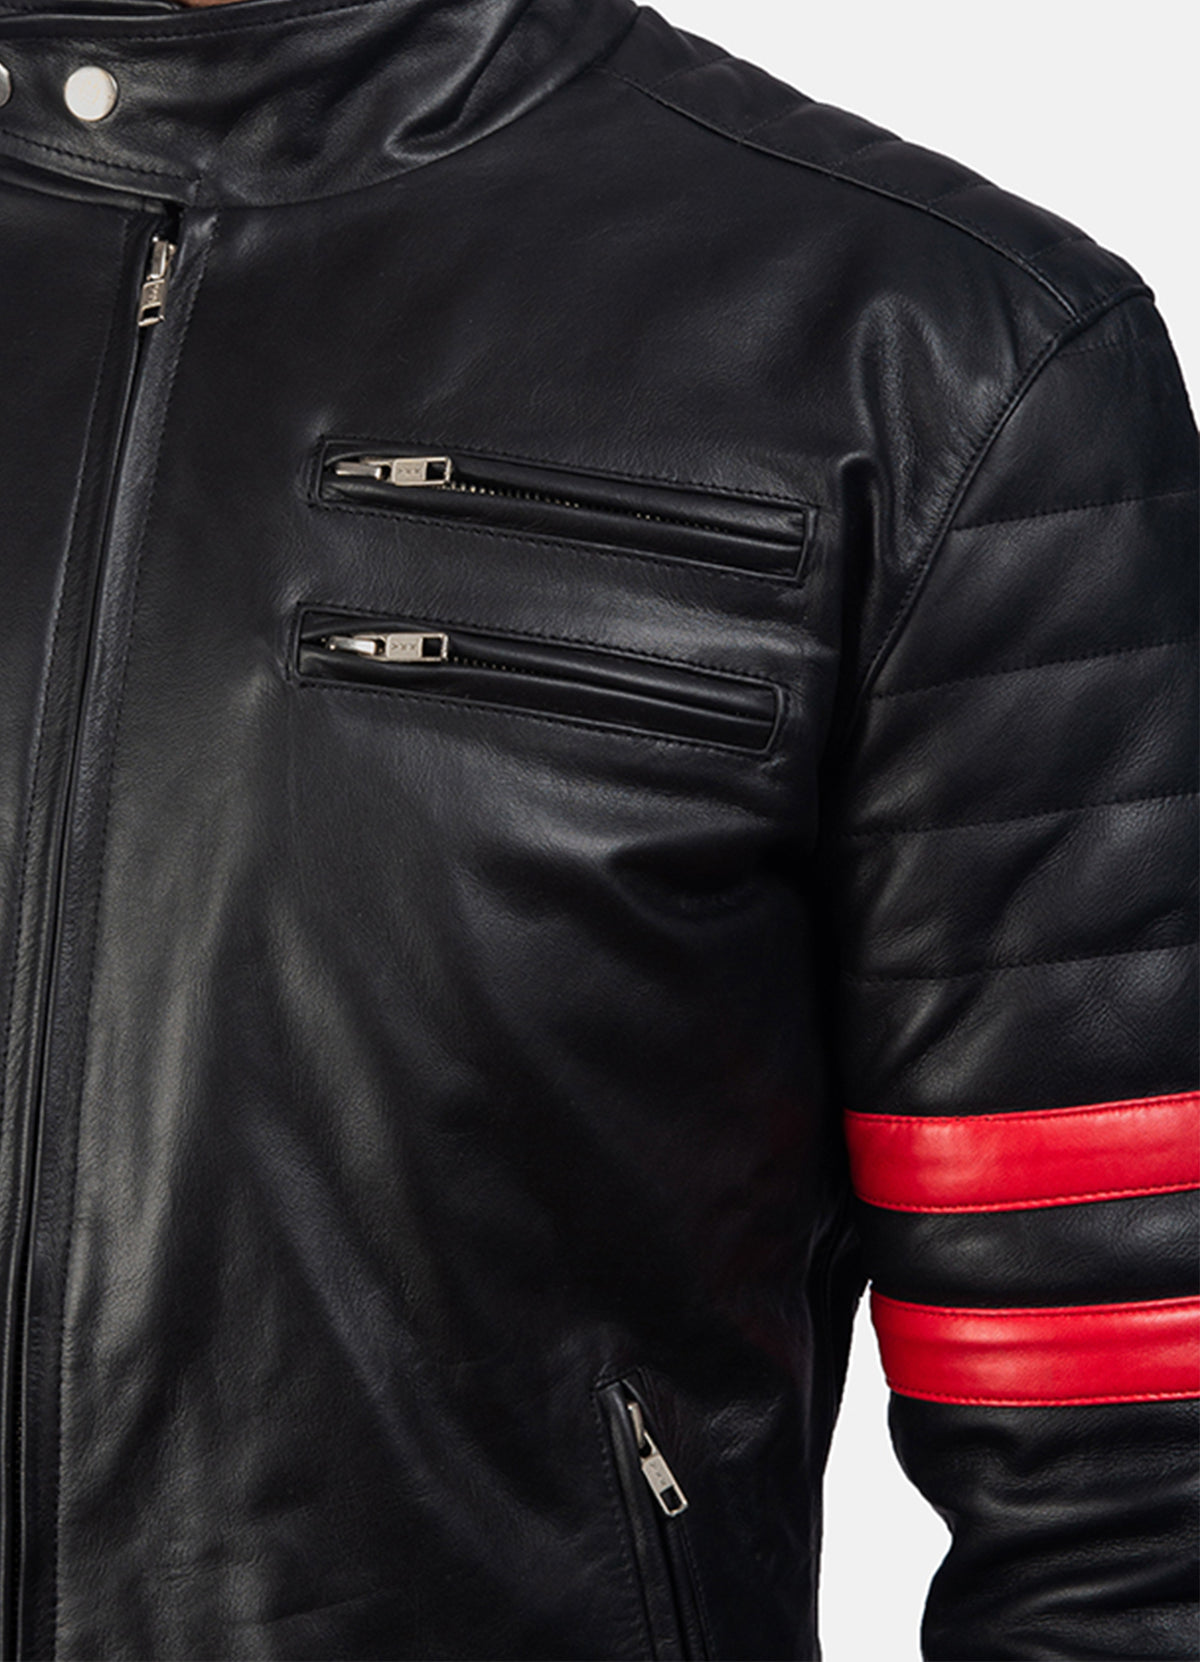 Mens Perfecto Black & Red Biker Leather Jacket